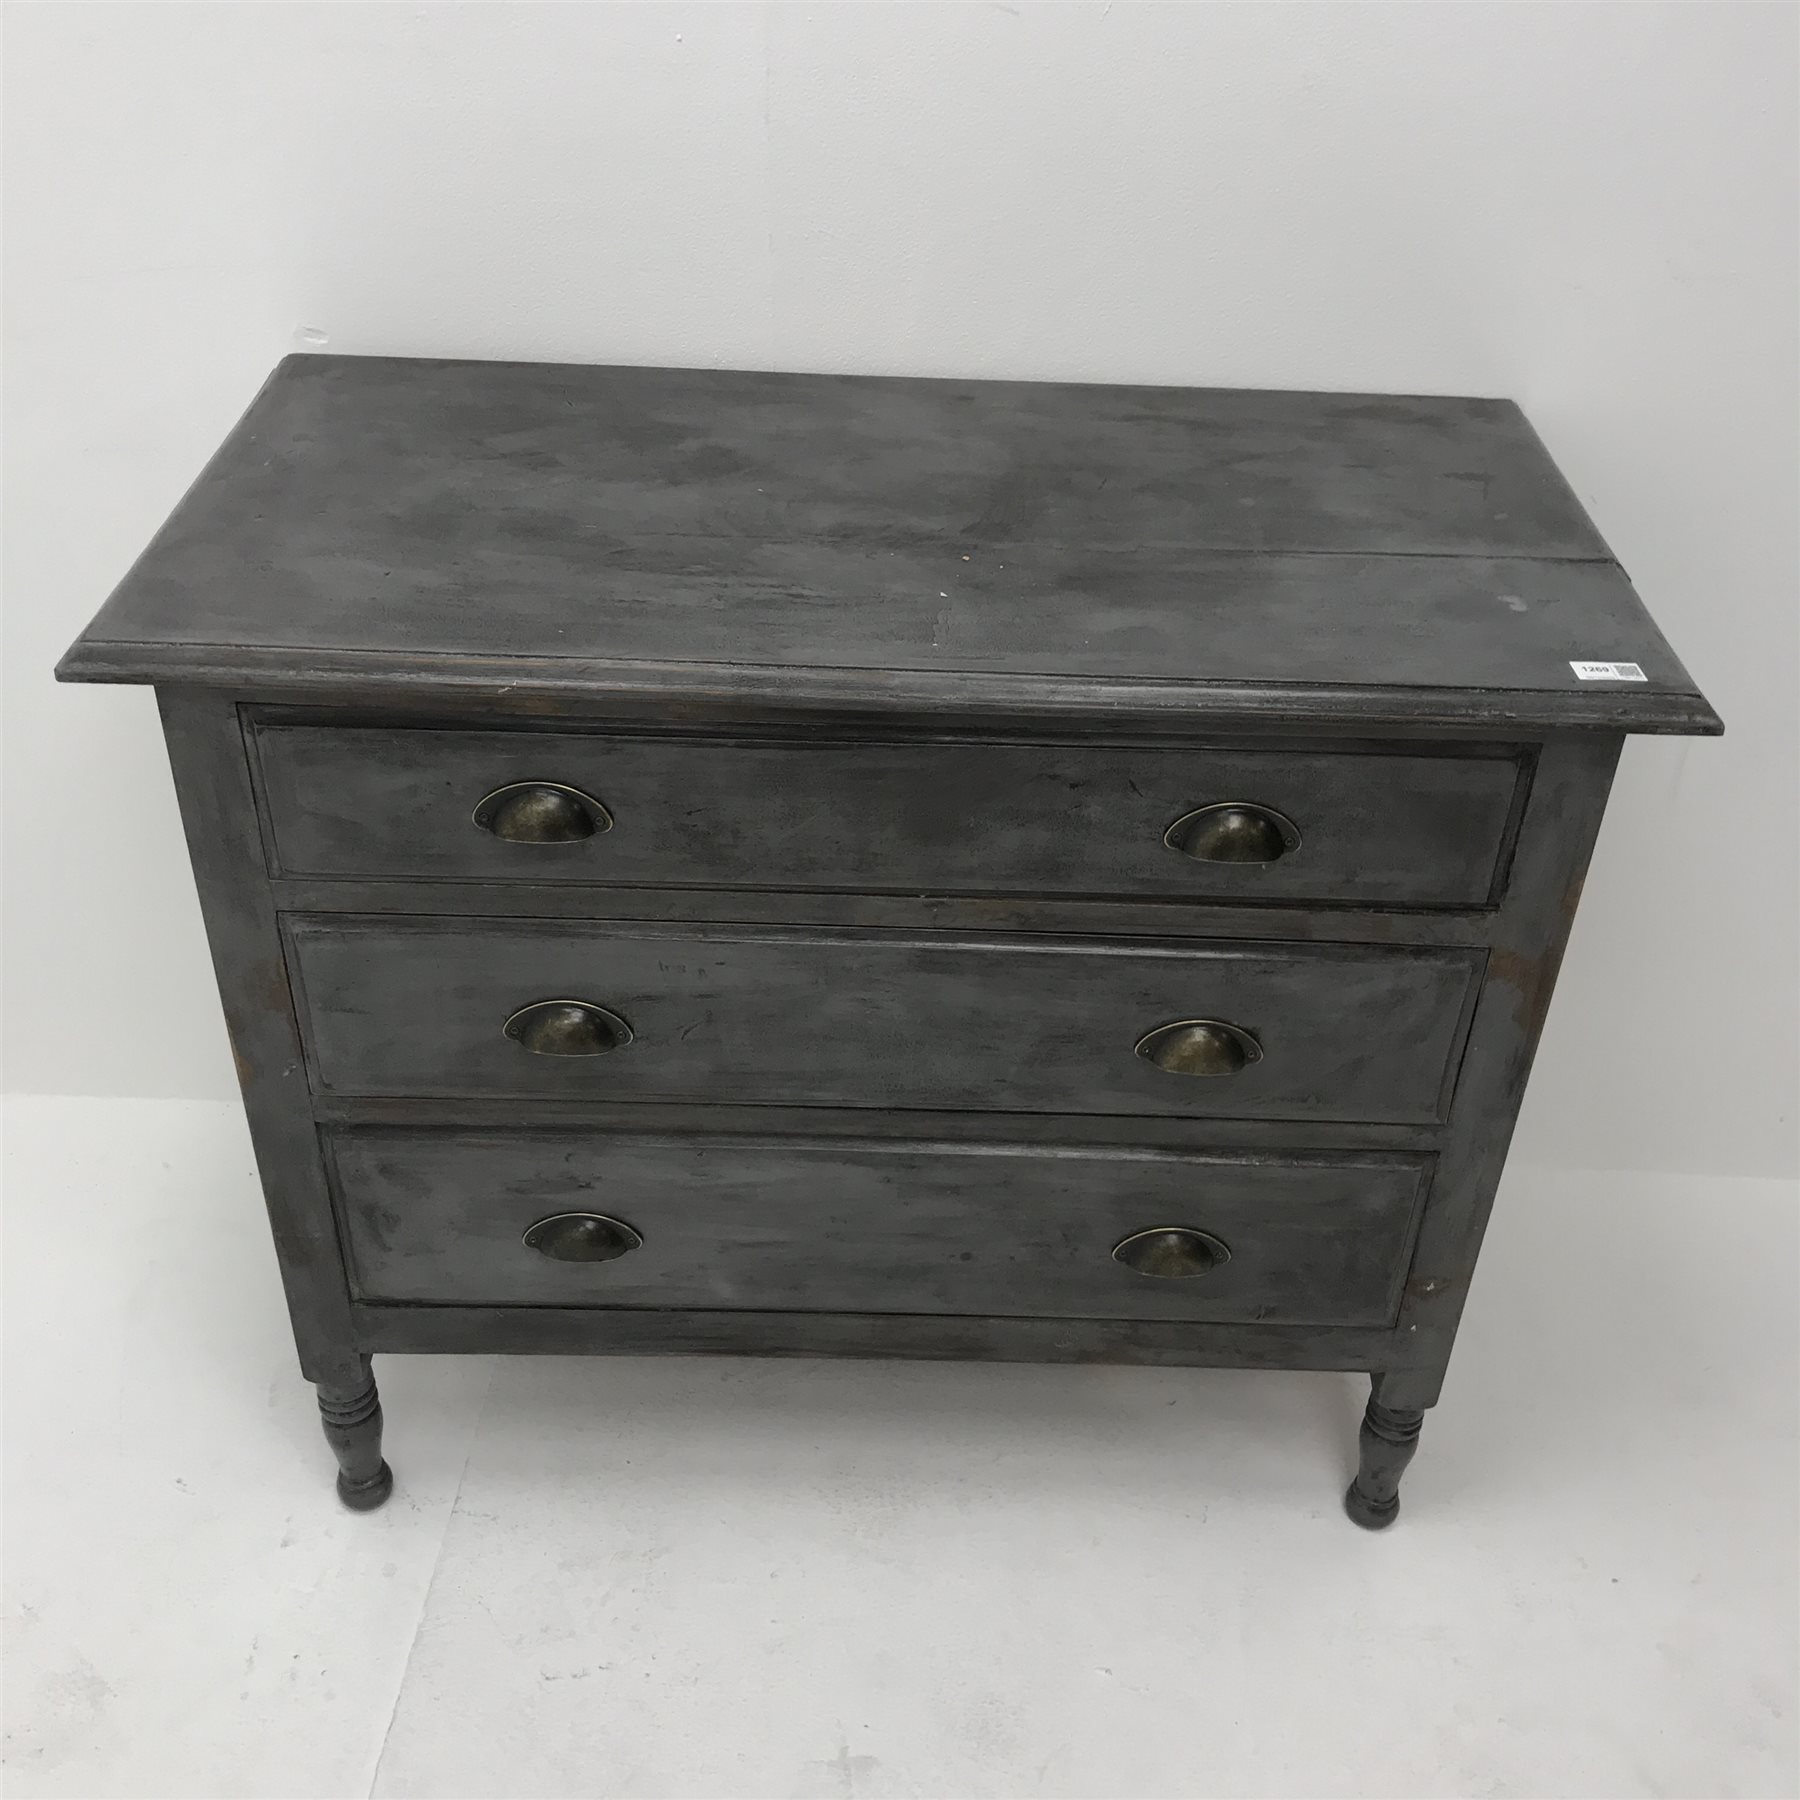 Early 20th century painted chest, three drawers, turned supports, W91cm, H76cm, D45cm - Image 2 of 3